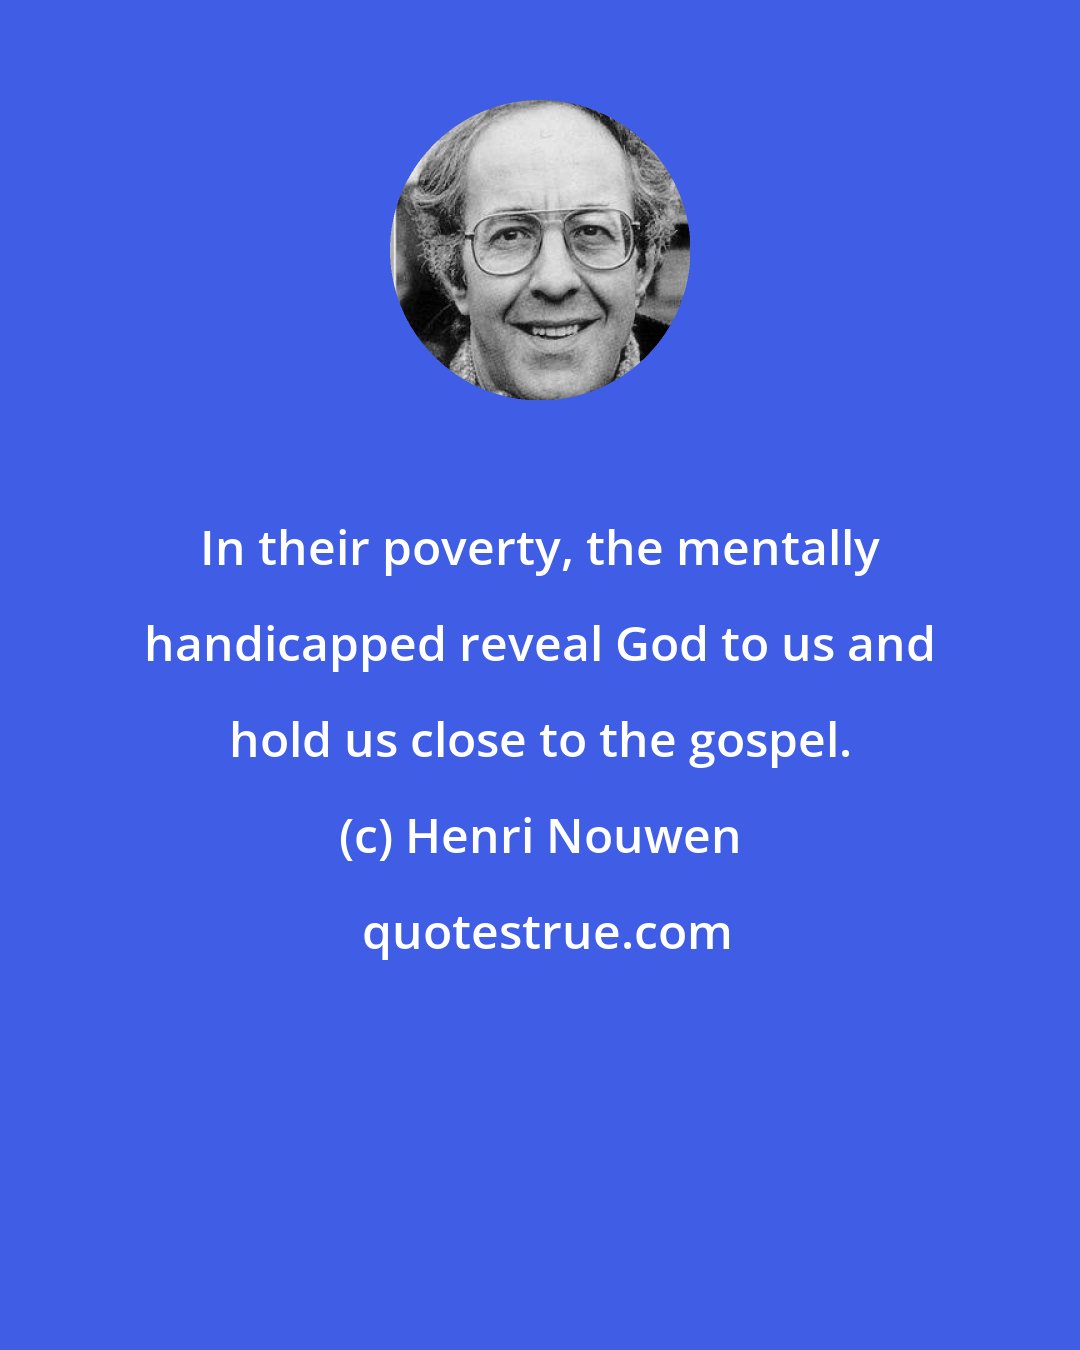 Henri Nouwen: In their poverty, the mentally handicapped reveal God to us and hold us close to the gospel.